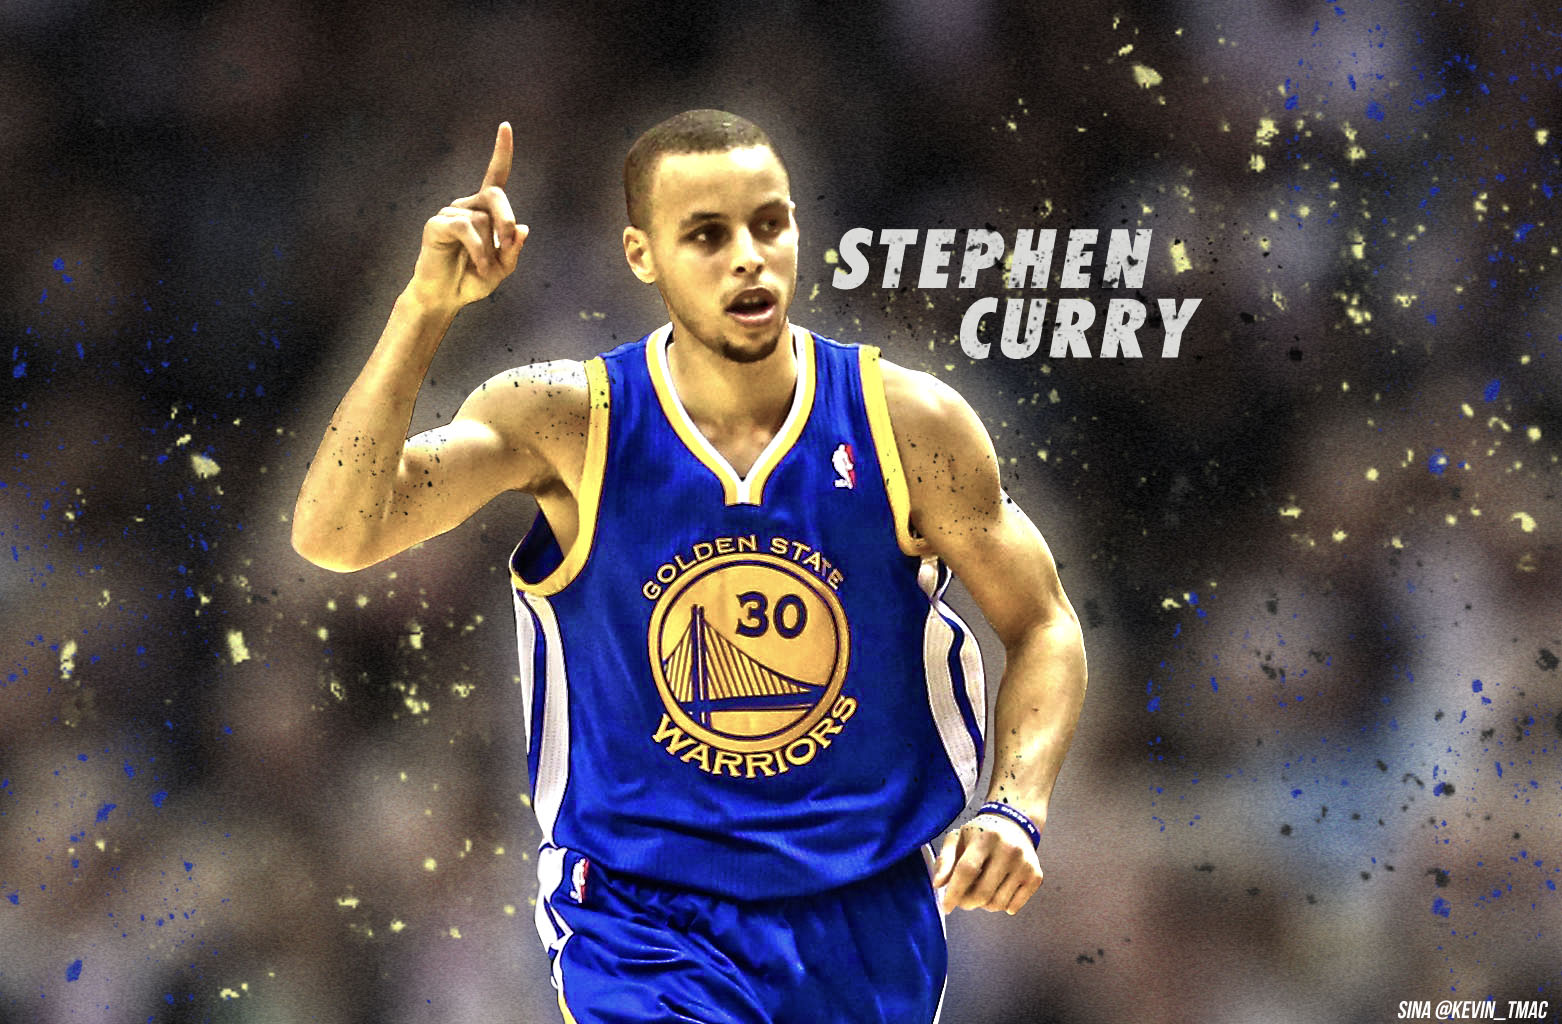 Stephen Curry Wallpapers Images On Wallpaper Hd 1562 - Stephen Curry Golden State Warriors Wallpaper 2015 - HD Wallpaper 